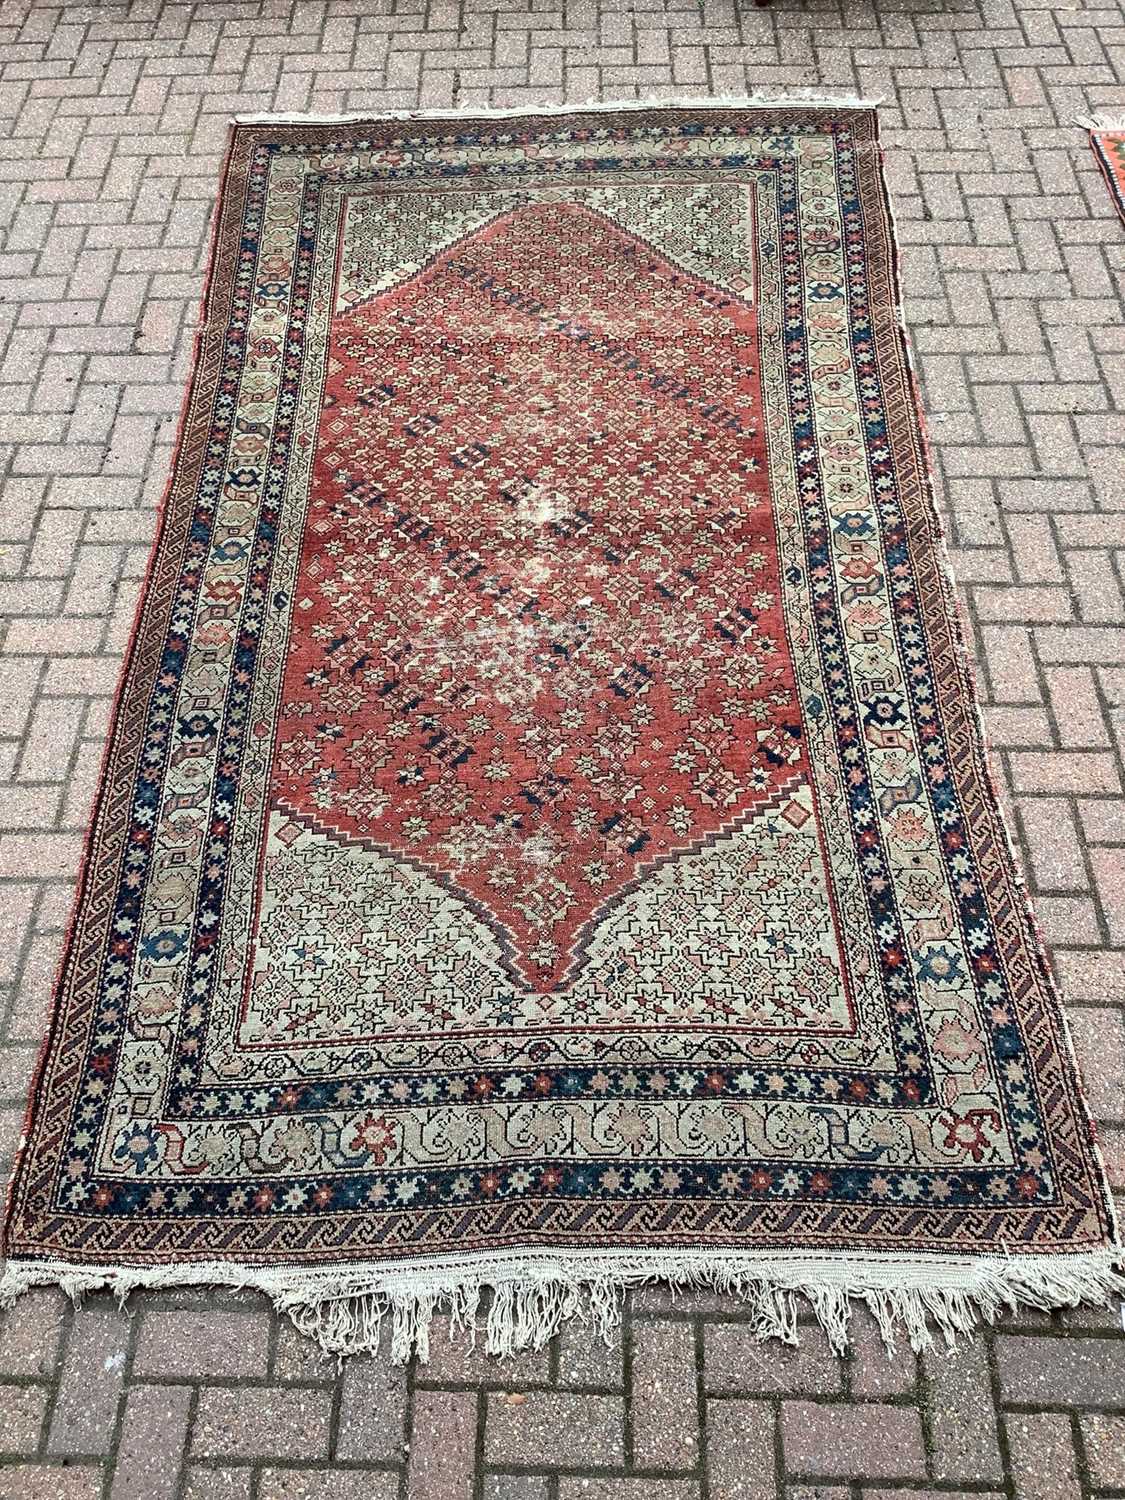 Lot 185 - Eastern rug with geometric decoration on red,blue and beige ground, 305cm x 163cm